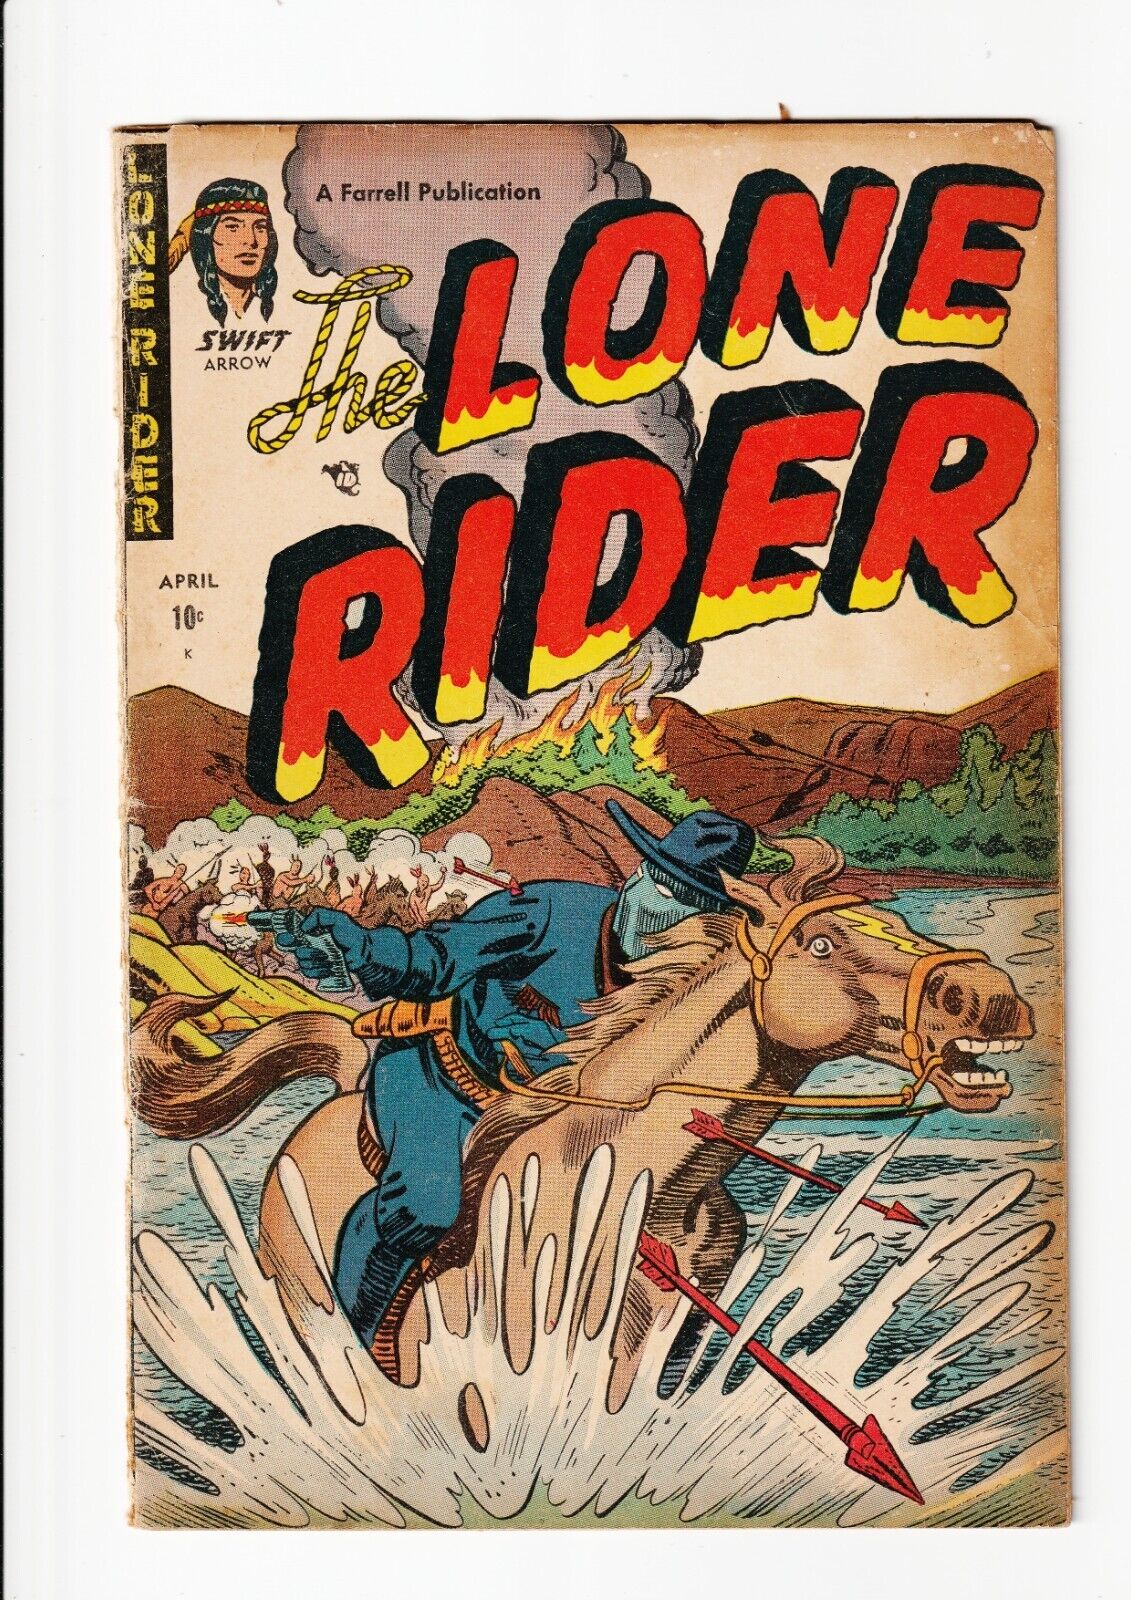 THE LONE RIDER # 7 (1952 FARRELL) WESTERN - 1st Print Very Good